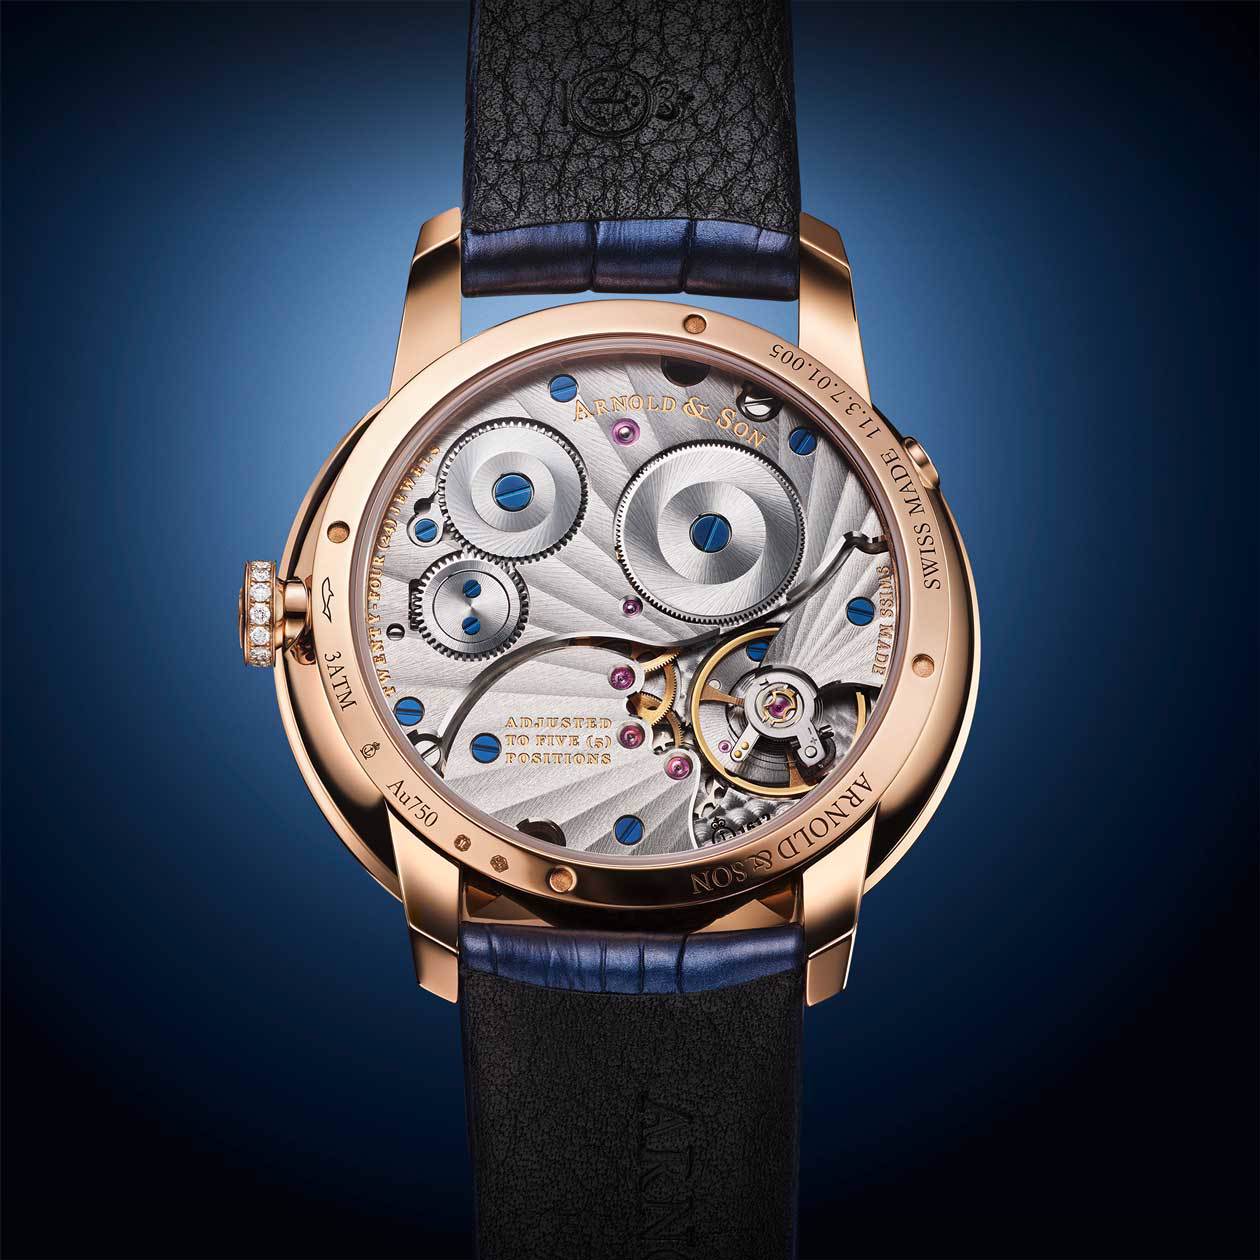 Perpetual Moon 38 Gold, Moonlight, by Arnold & Son